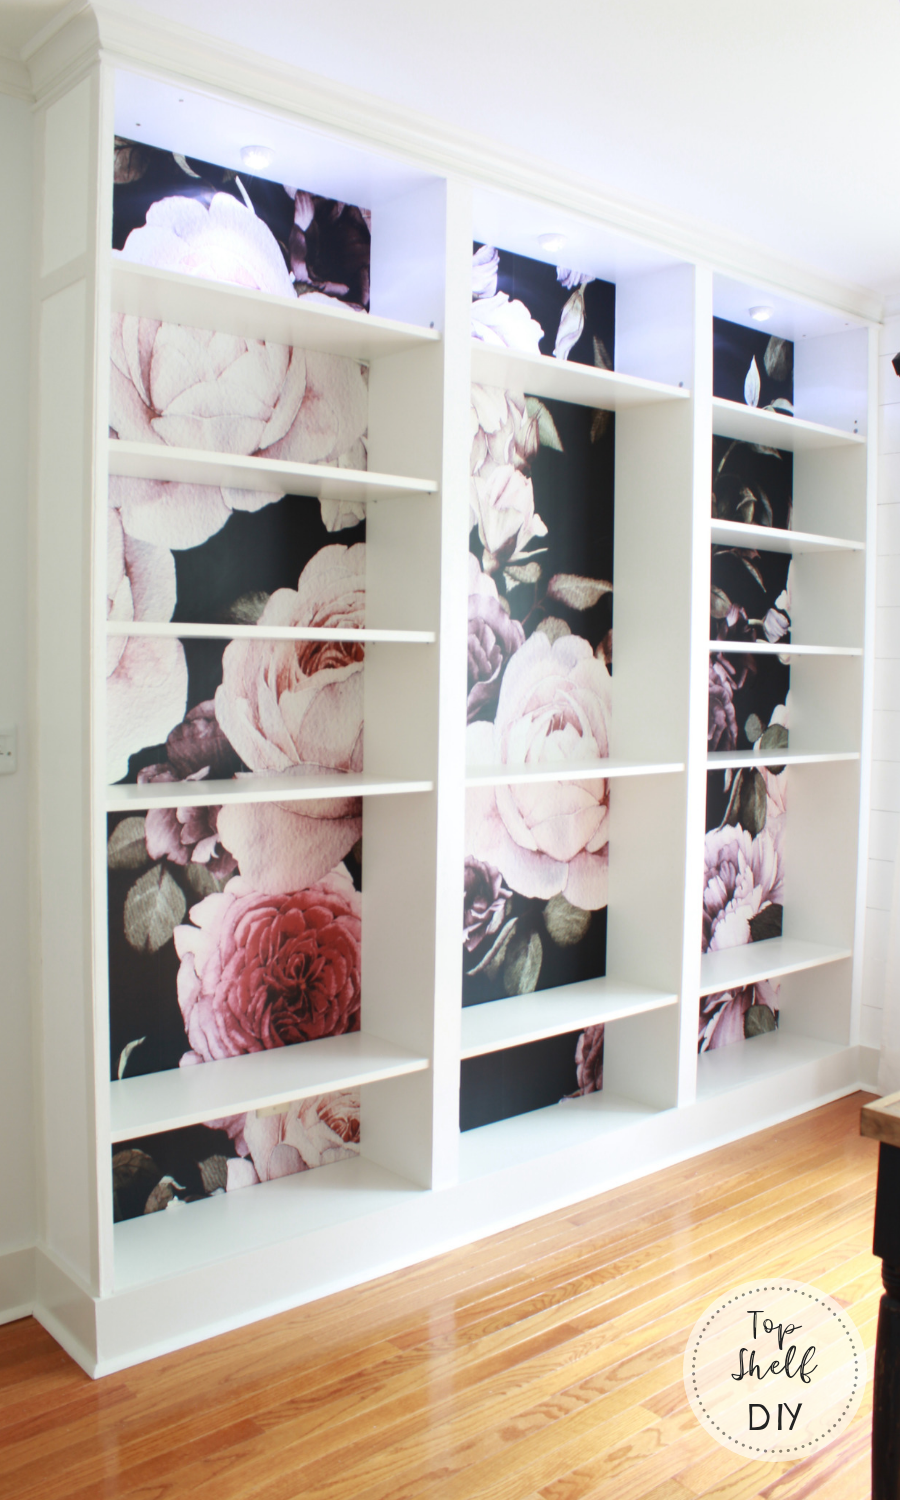 How To Apply Removable Wallpaper Ikea Billy Bookshelves Top